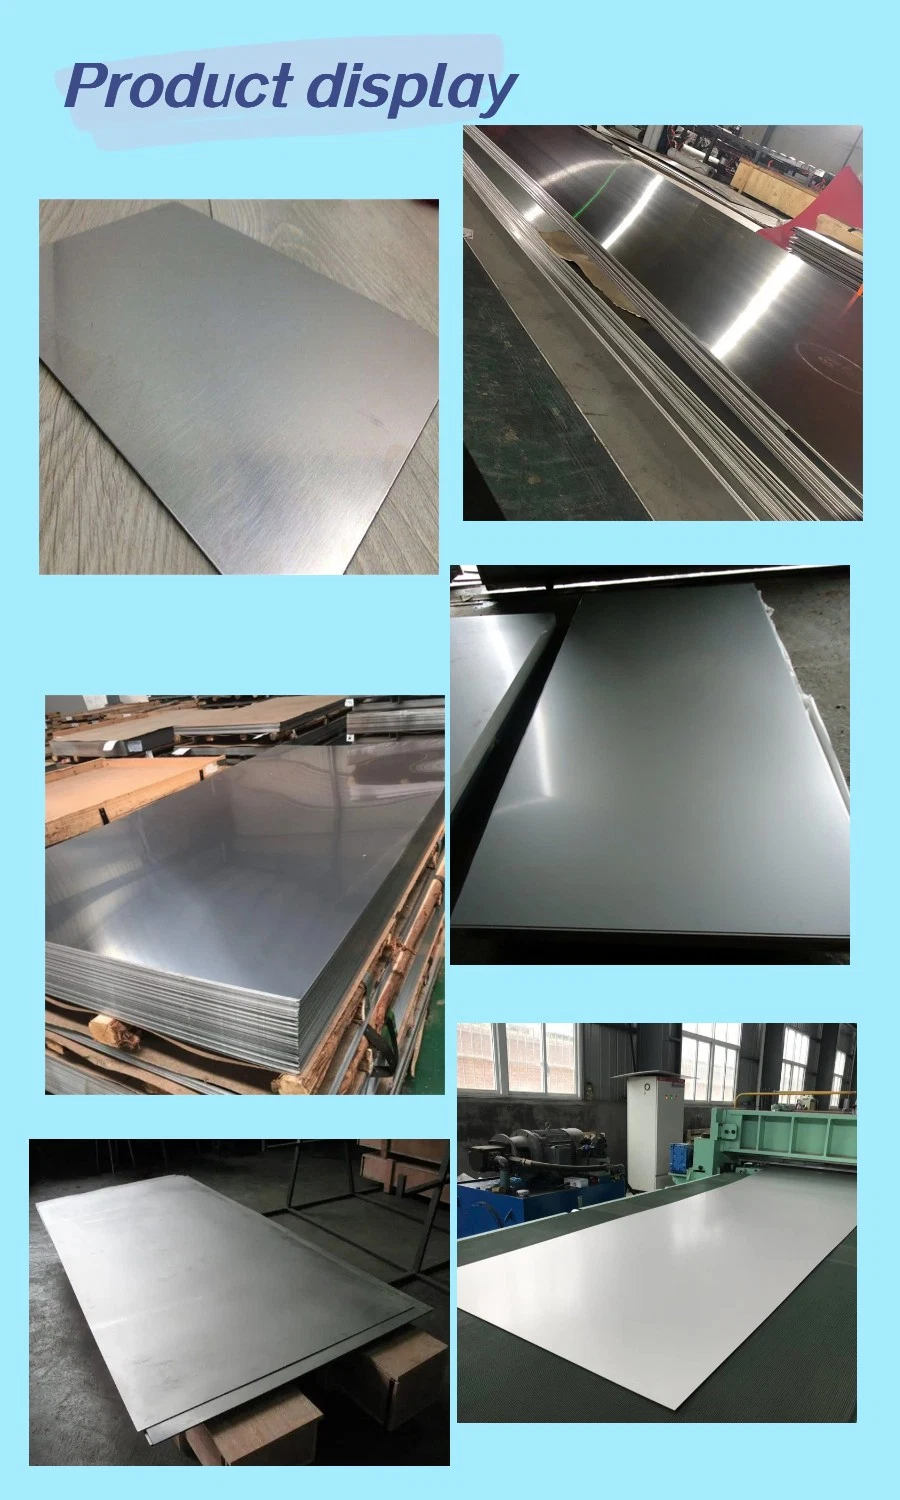 The Real Deal Stainless Steel Sheet Components and Equipment for Manufacturing Machinery